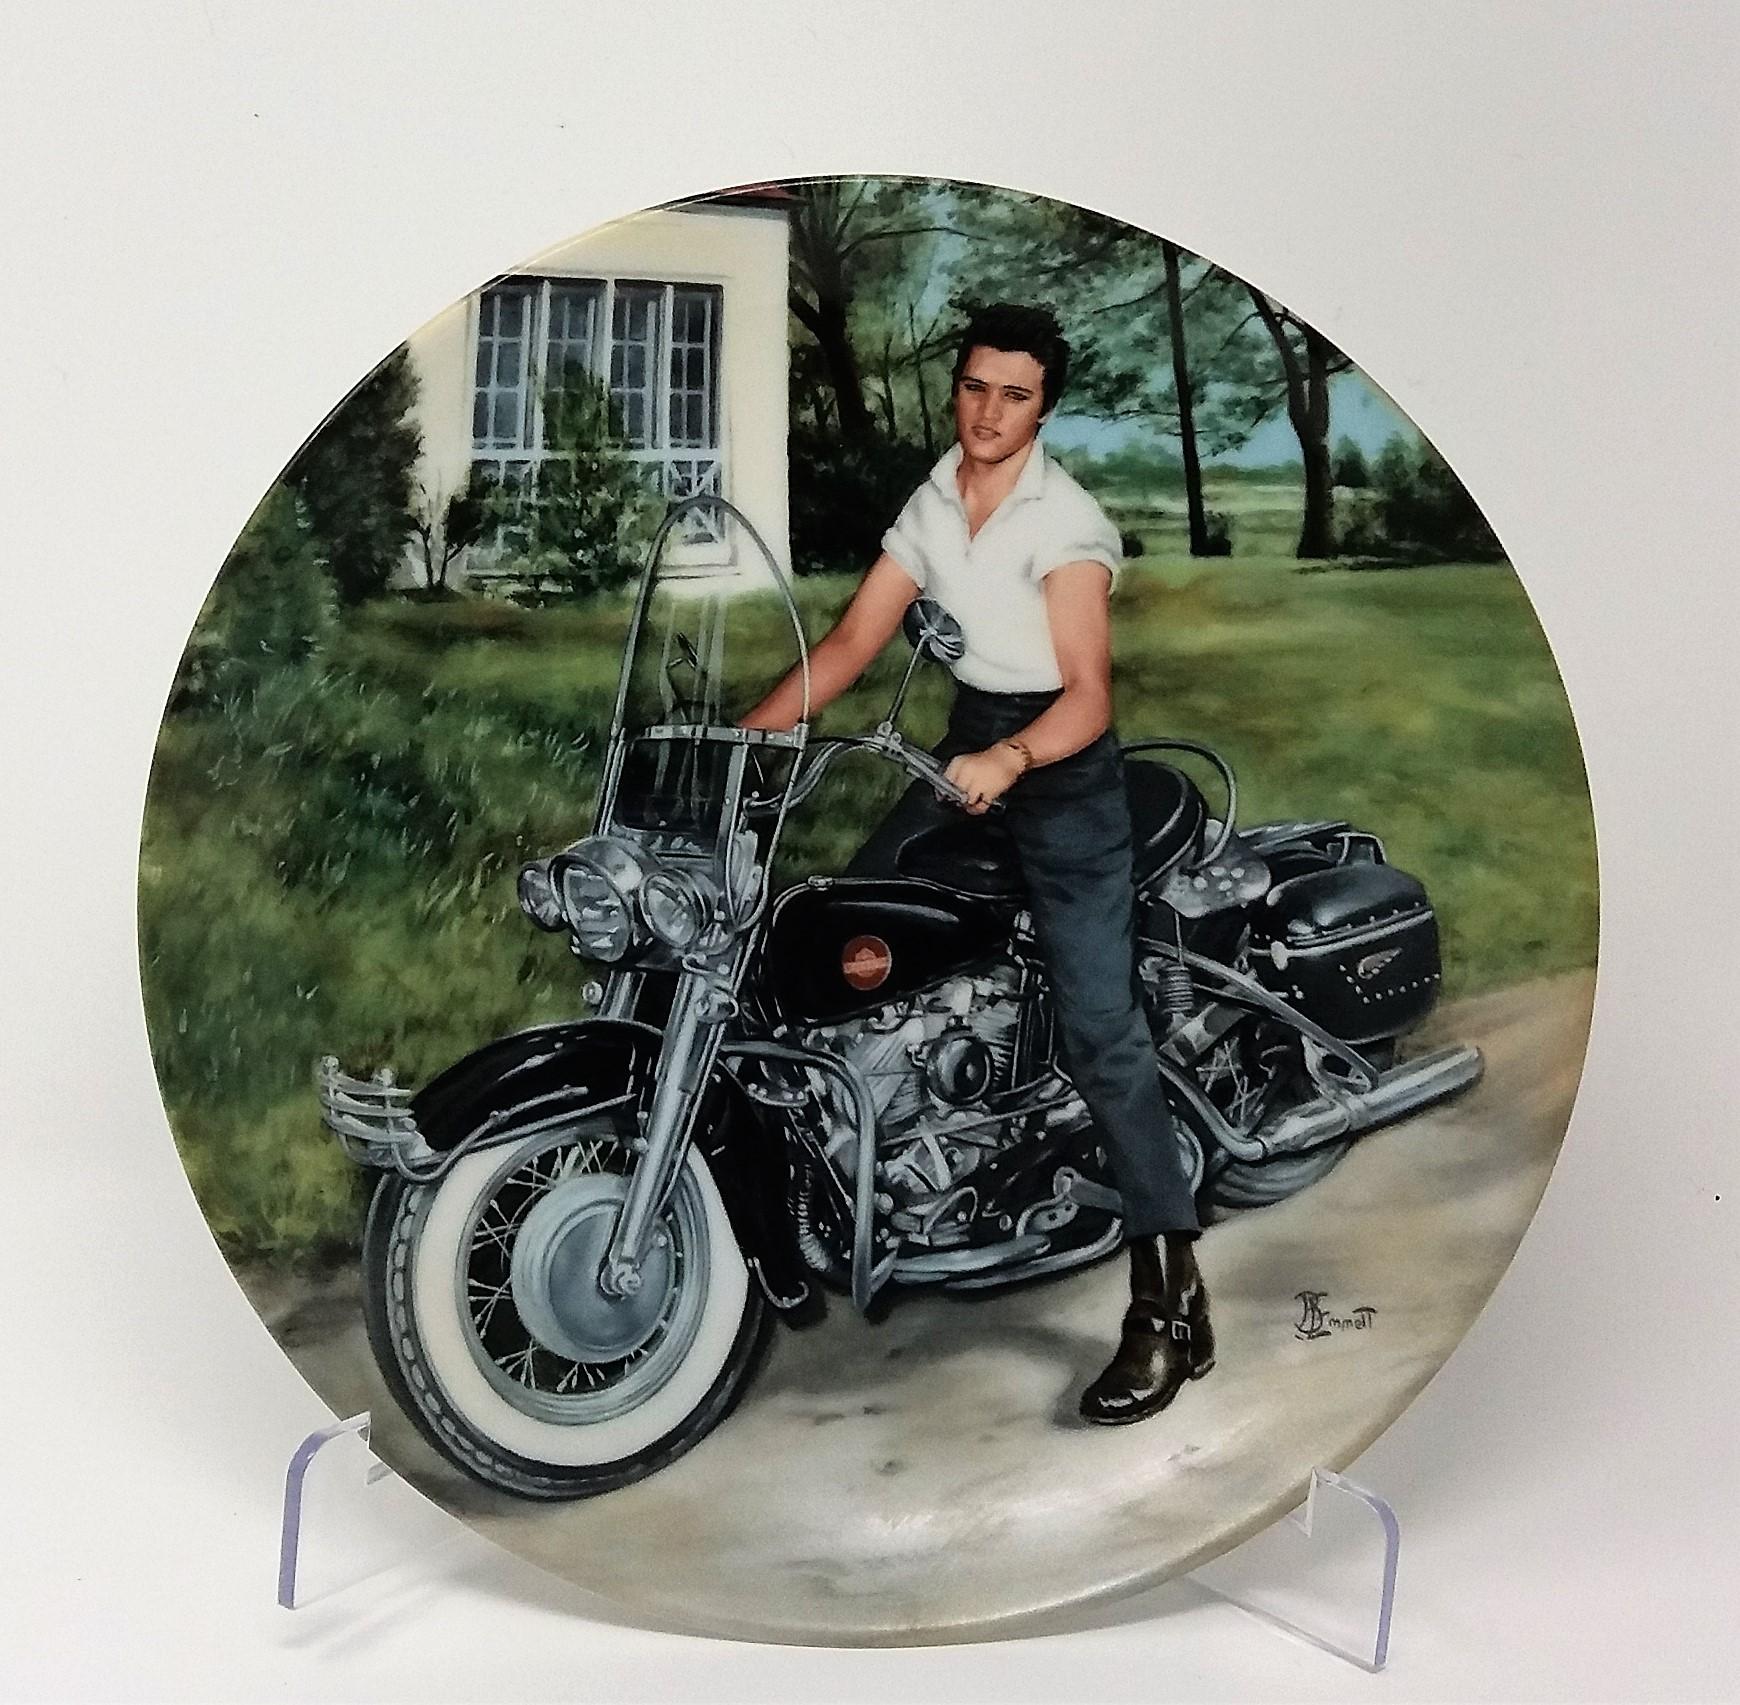 Elvis Presley Collectible Plate "Looking At A Legend: Elvis On His Harley"